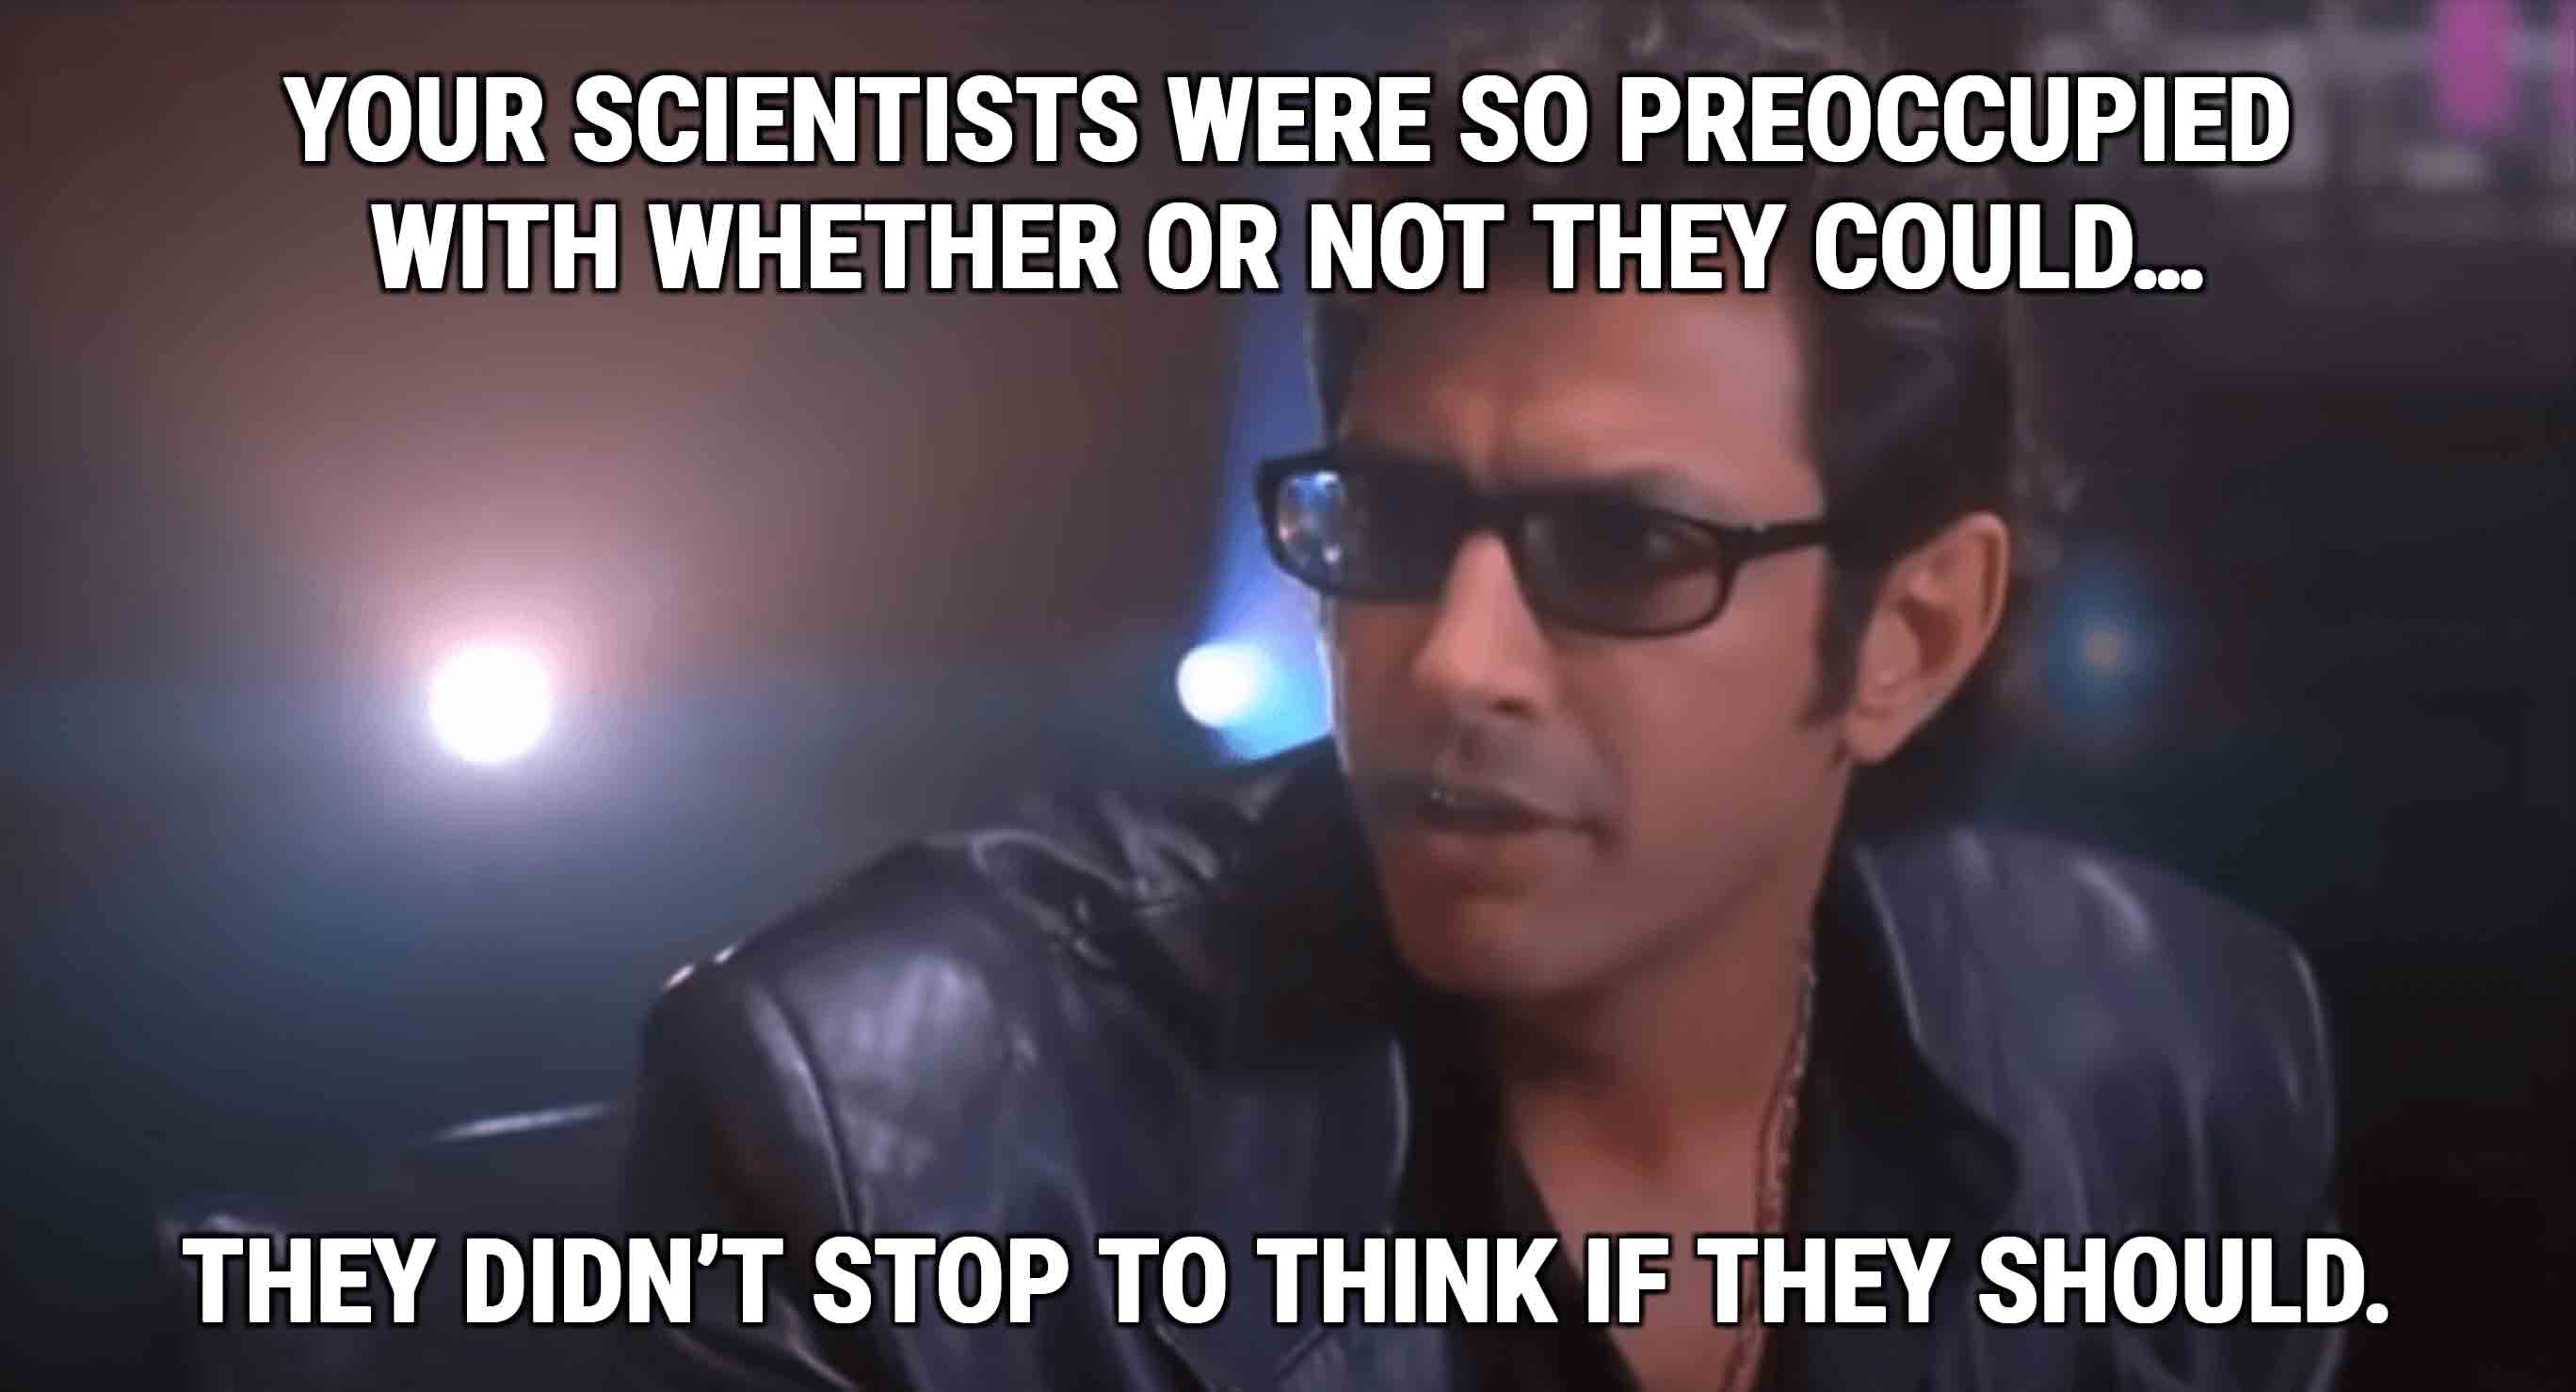 Jeff Goldblum saying “Your scientists were so preoccupied with whether or not they could, they didn’t stop to think if they should.”